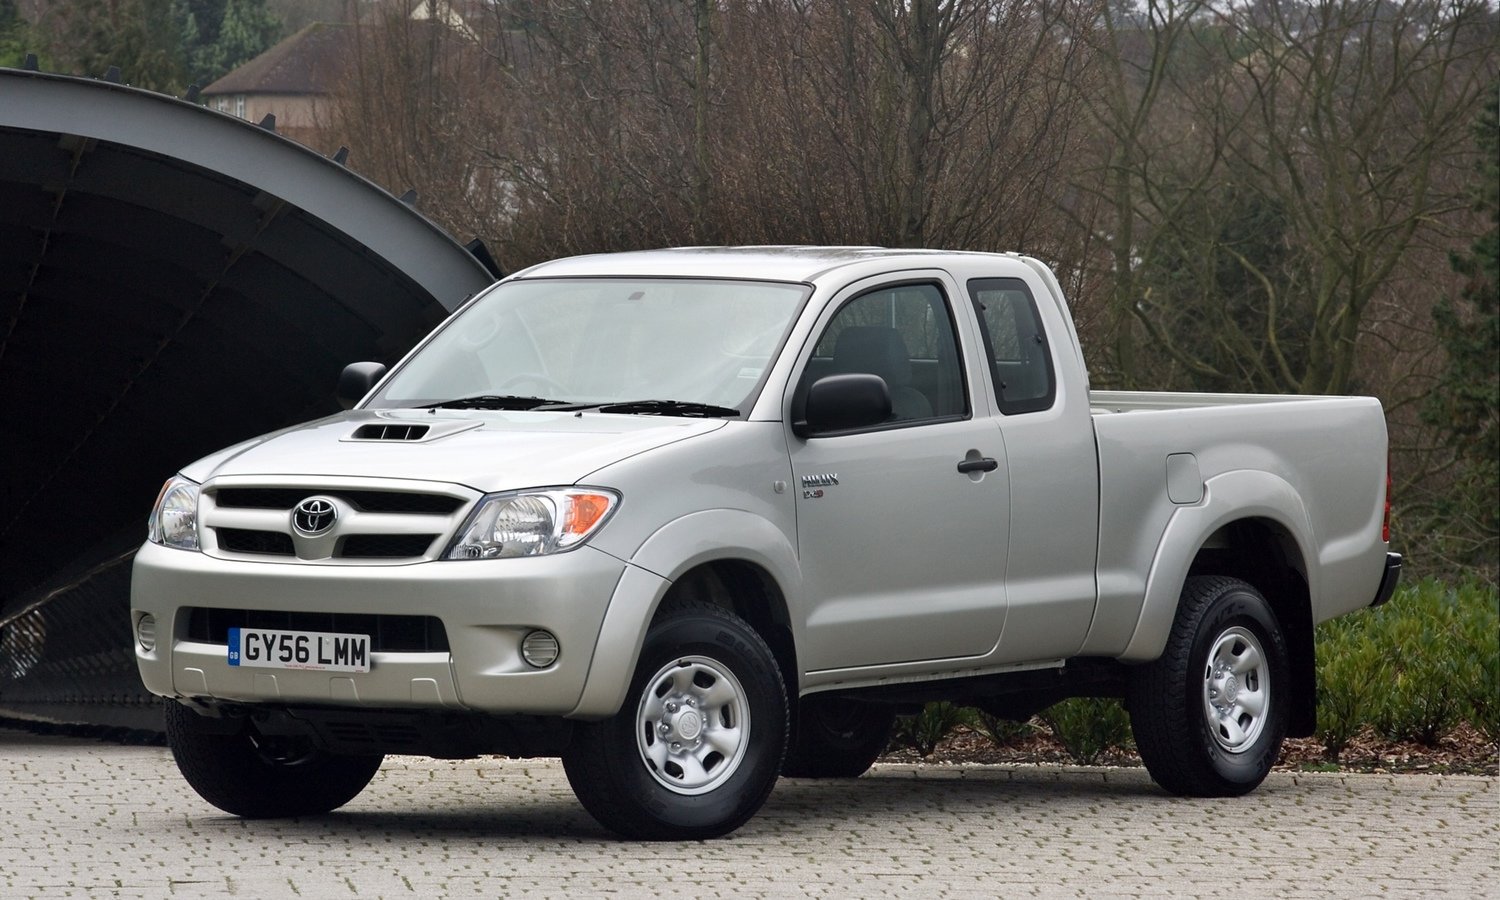 Toyota Hilux - EZDown (2004 -2015 Vigo model) (LOWERING OF YOUR TAILGATE SAFELY)